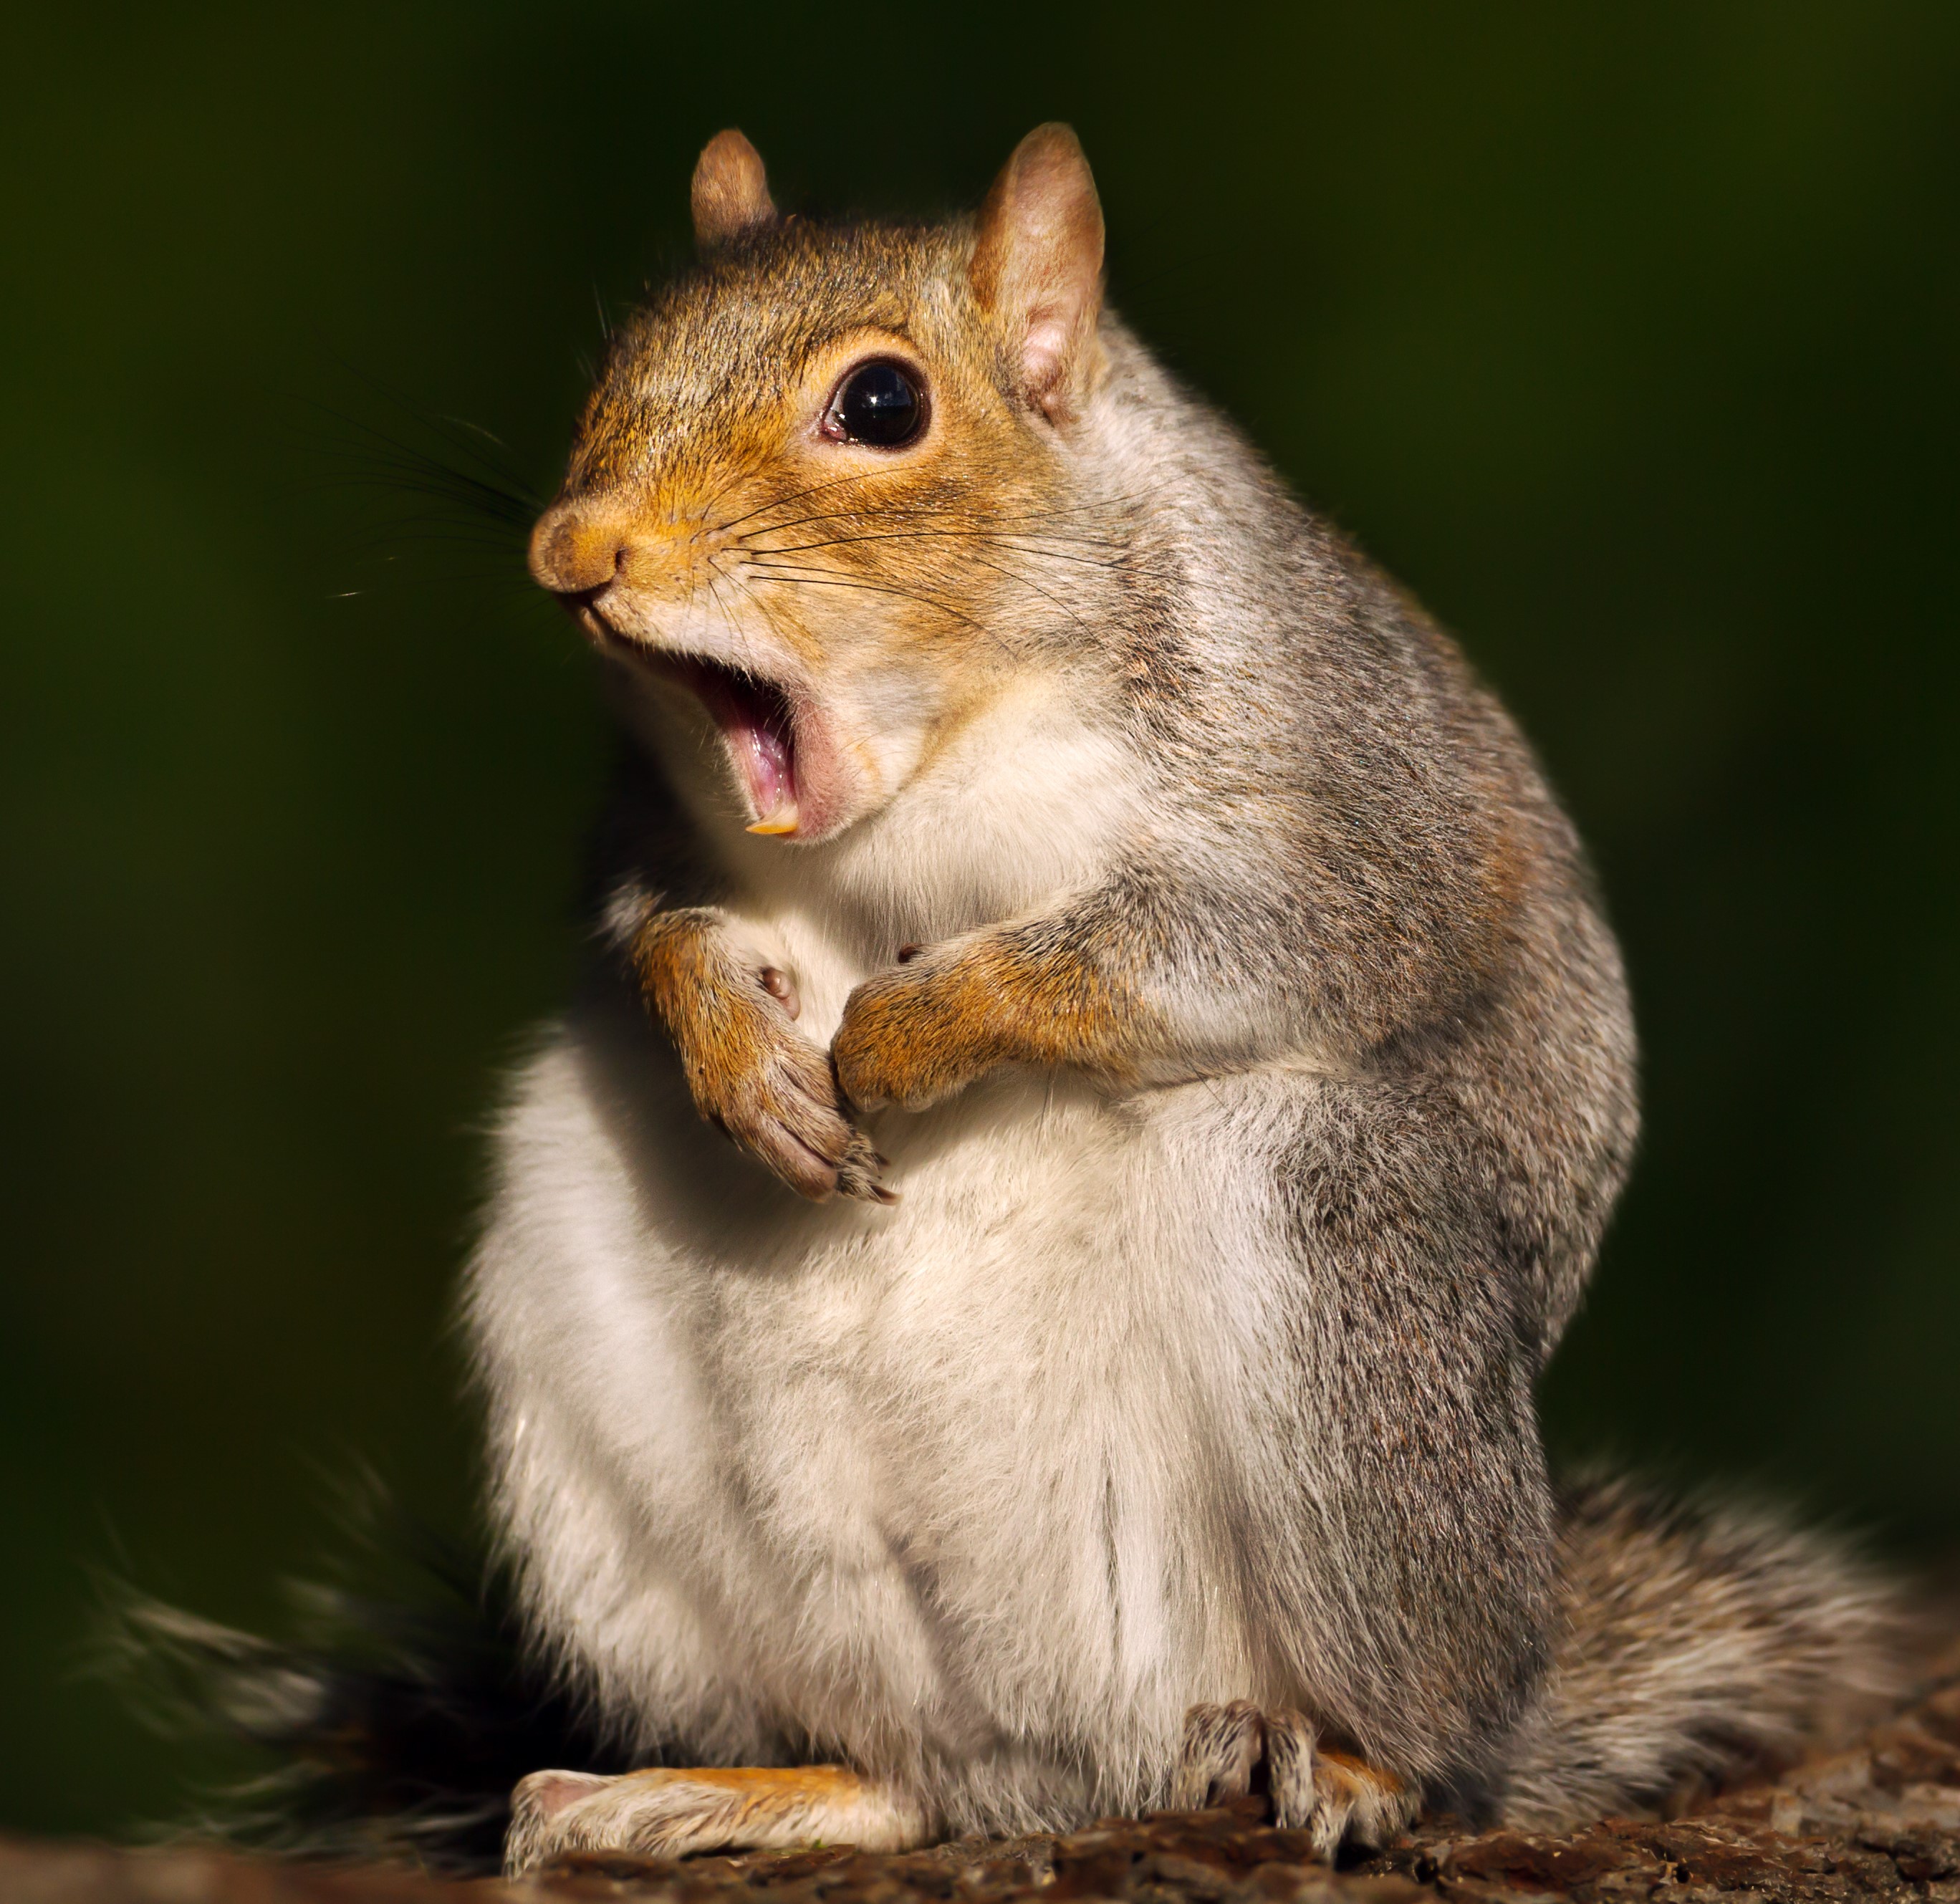 A shocked squirrel saying "You said what??"